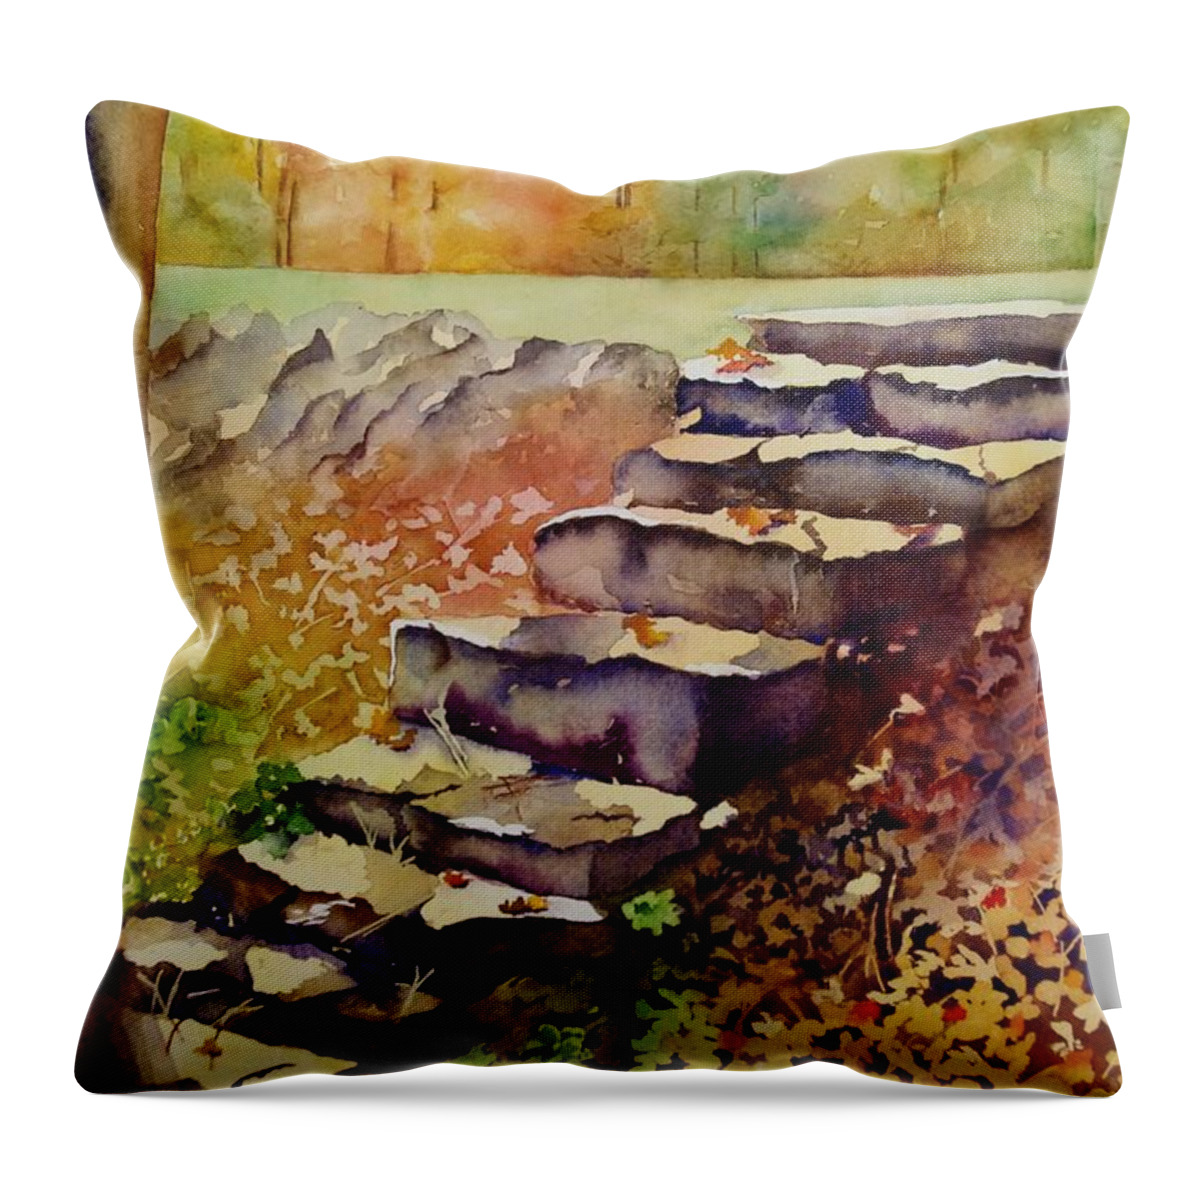 Rocks Throw Pillow featuring the painting Rock Steps by Beth Fontenot